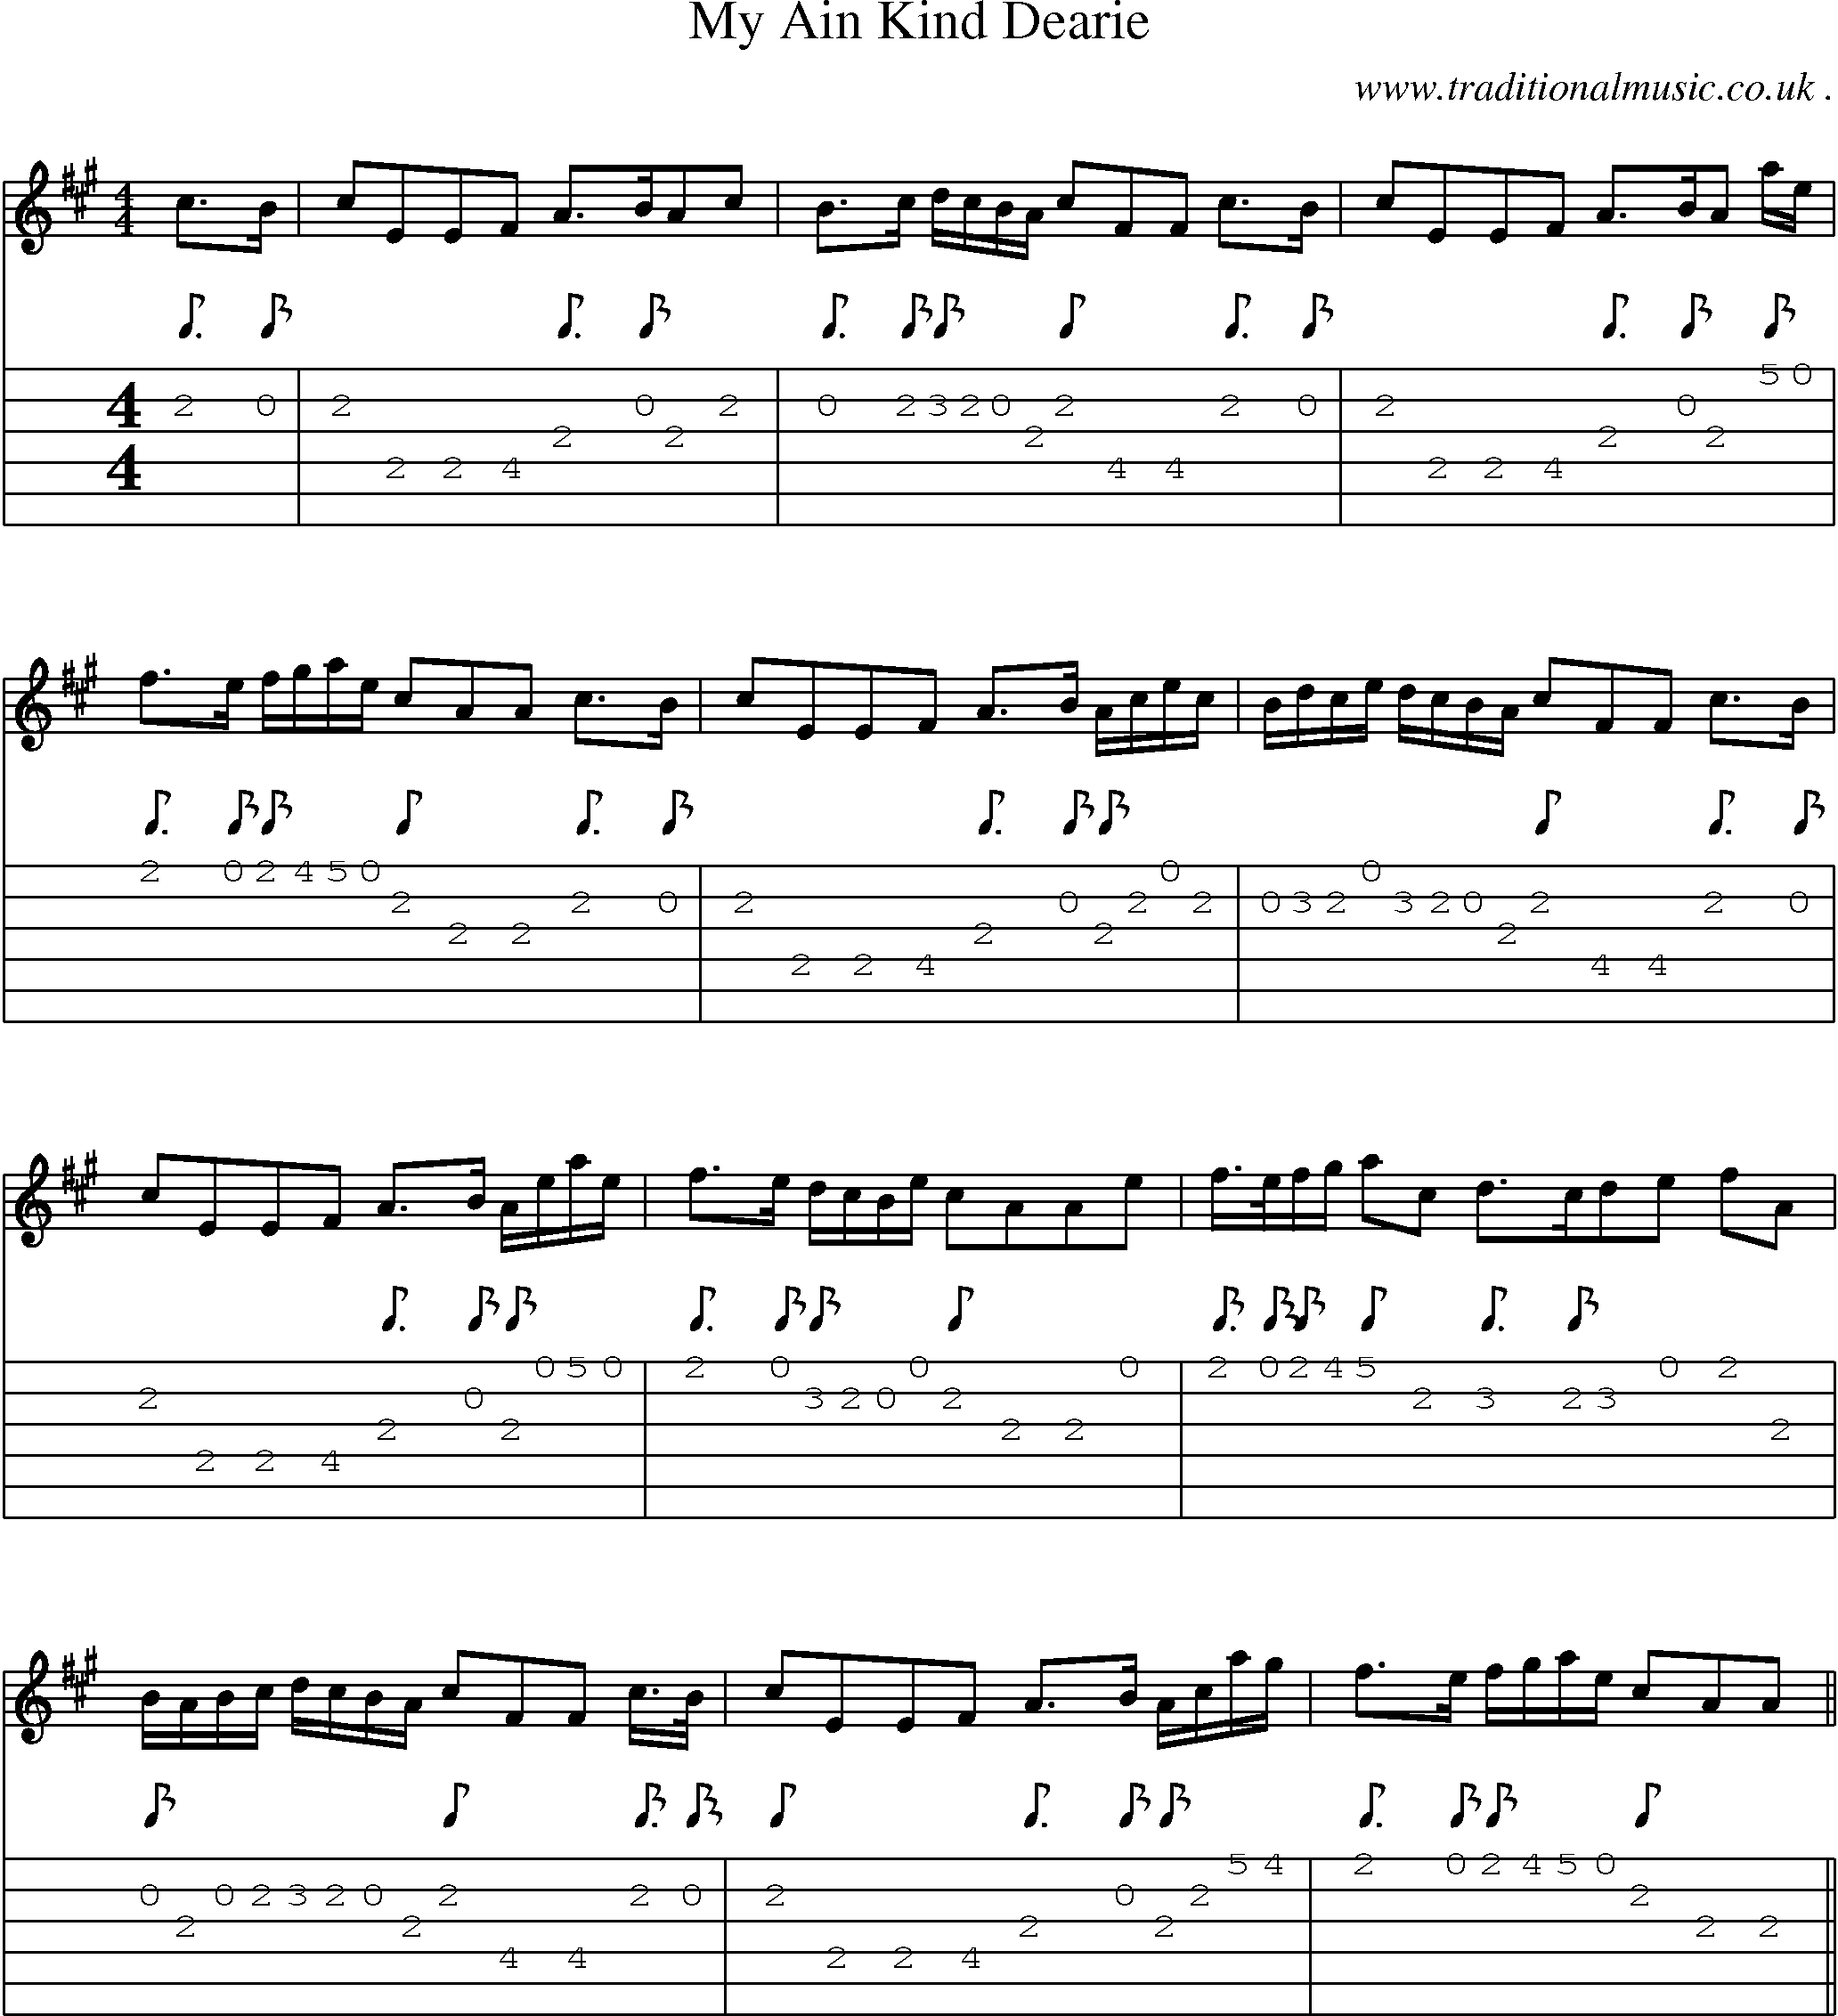 Sheet-Music and Guitar Tabs for My Ain Kind Dearie